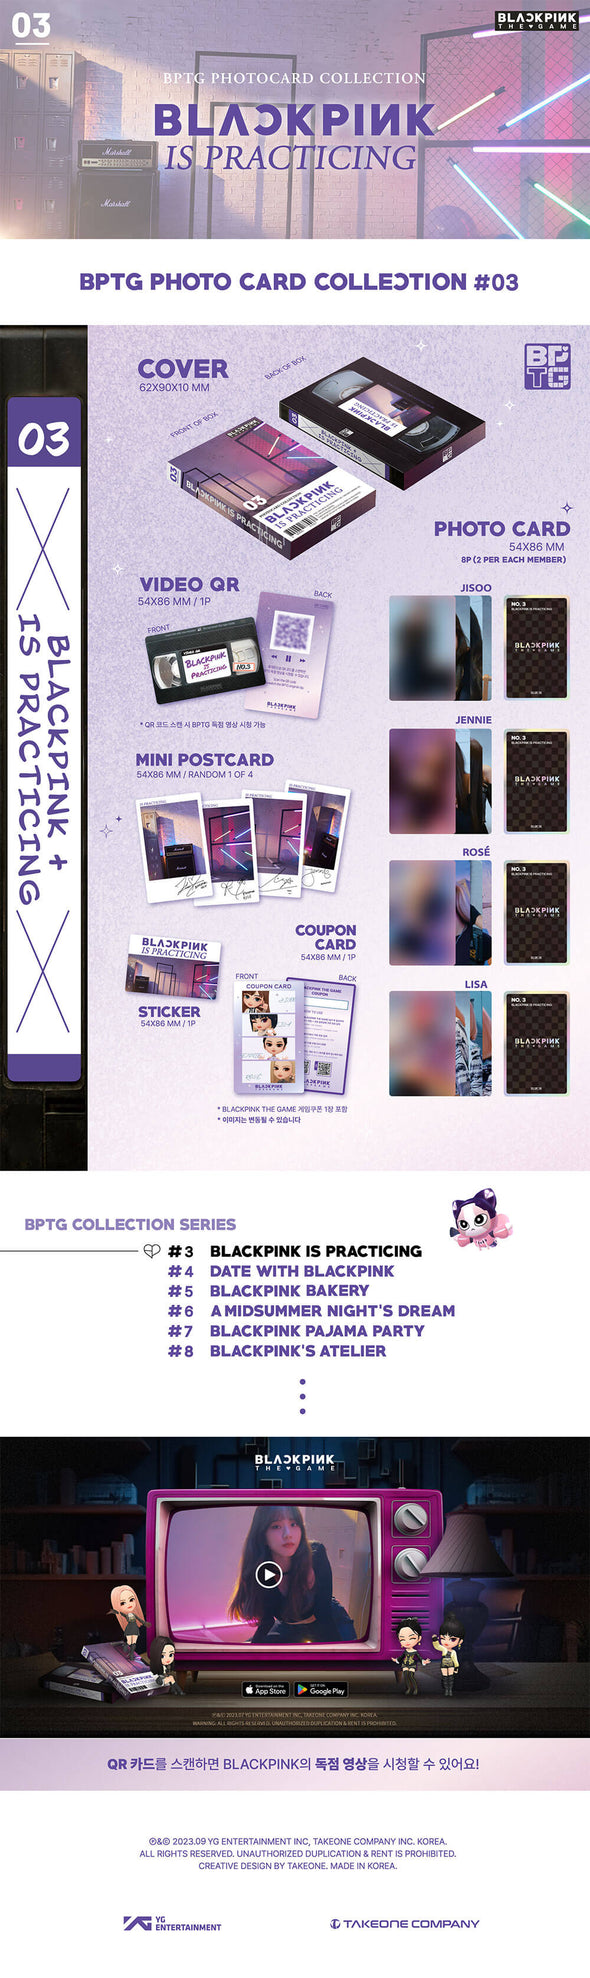 BLACKPINK - The Game Photocard Collection (3 Versions)